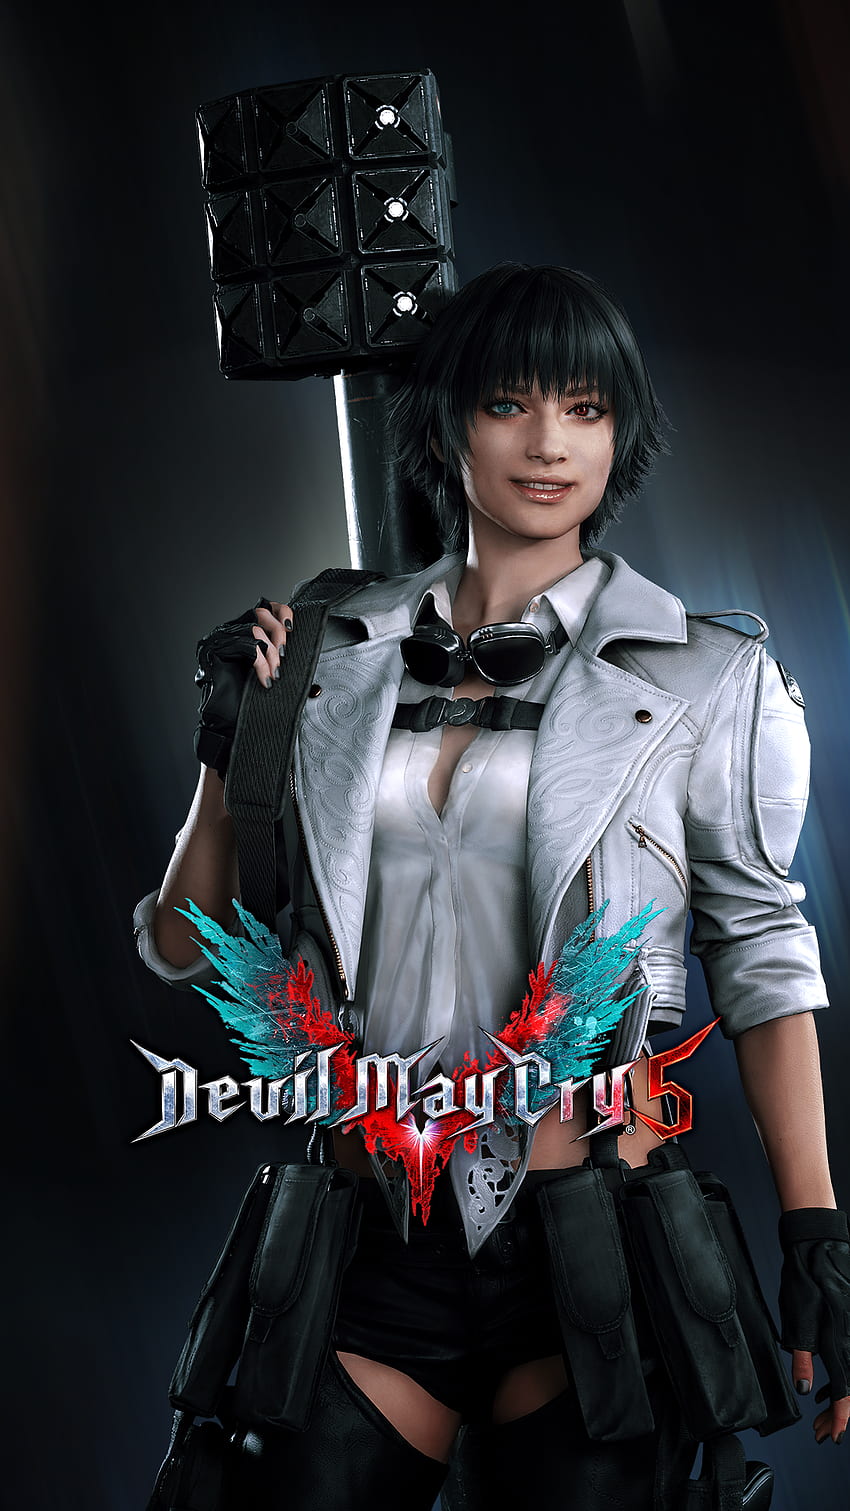 Made a phone of best girl Lady: DevilMayCry HD phone wallpaper